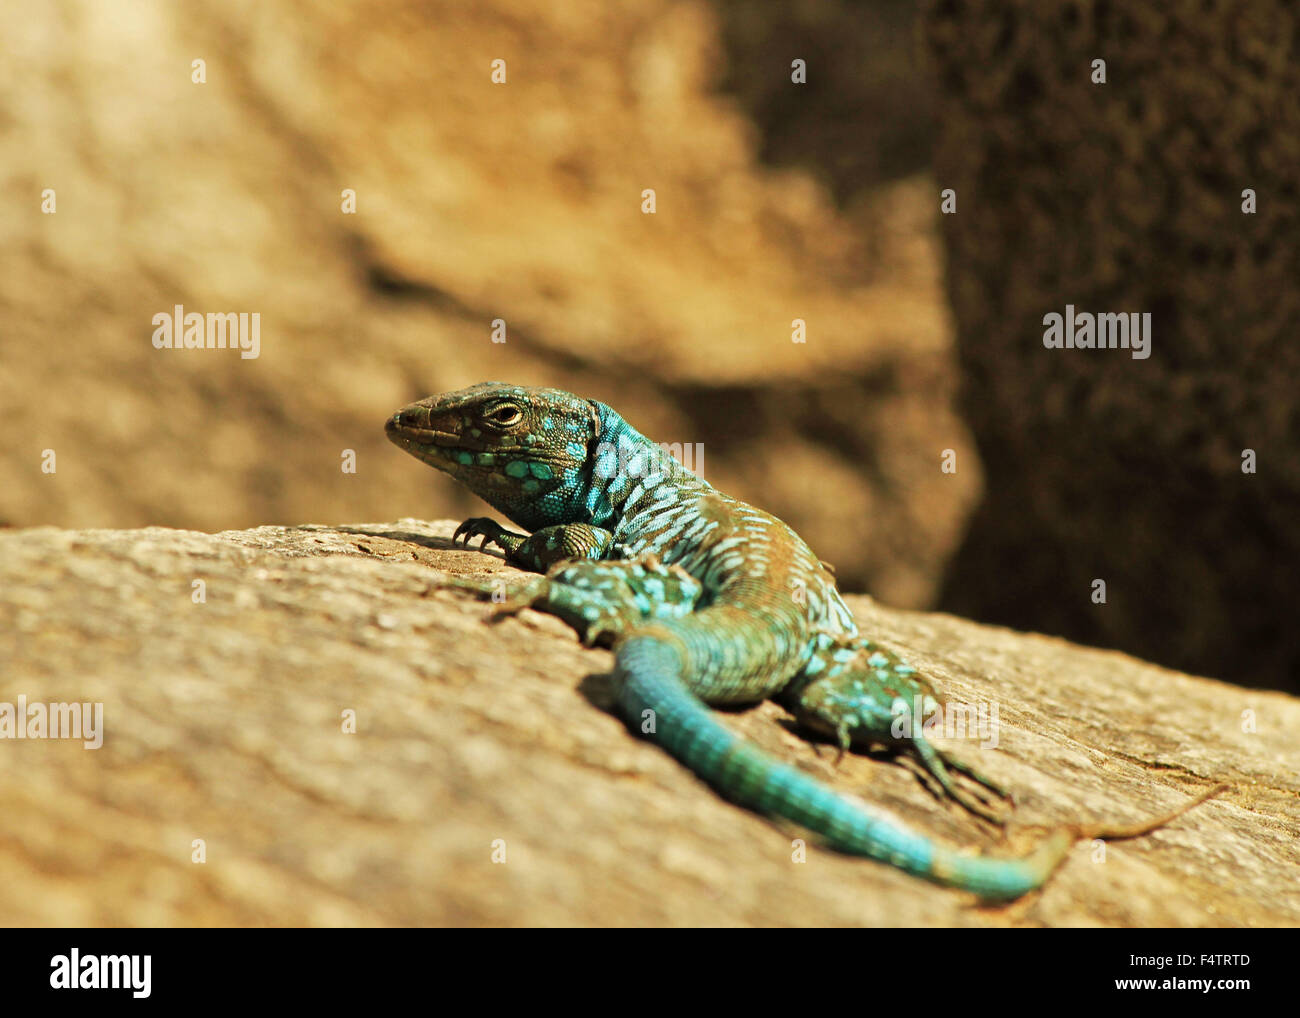 Blue-spotted Aruban whiptail lizard lounging in the sun on a rock Stock Photo